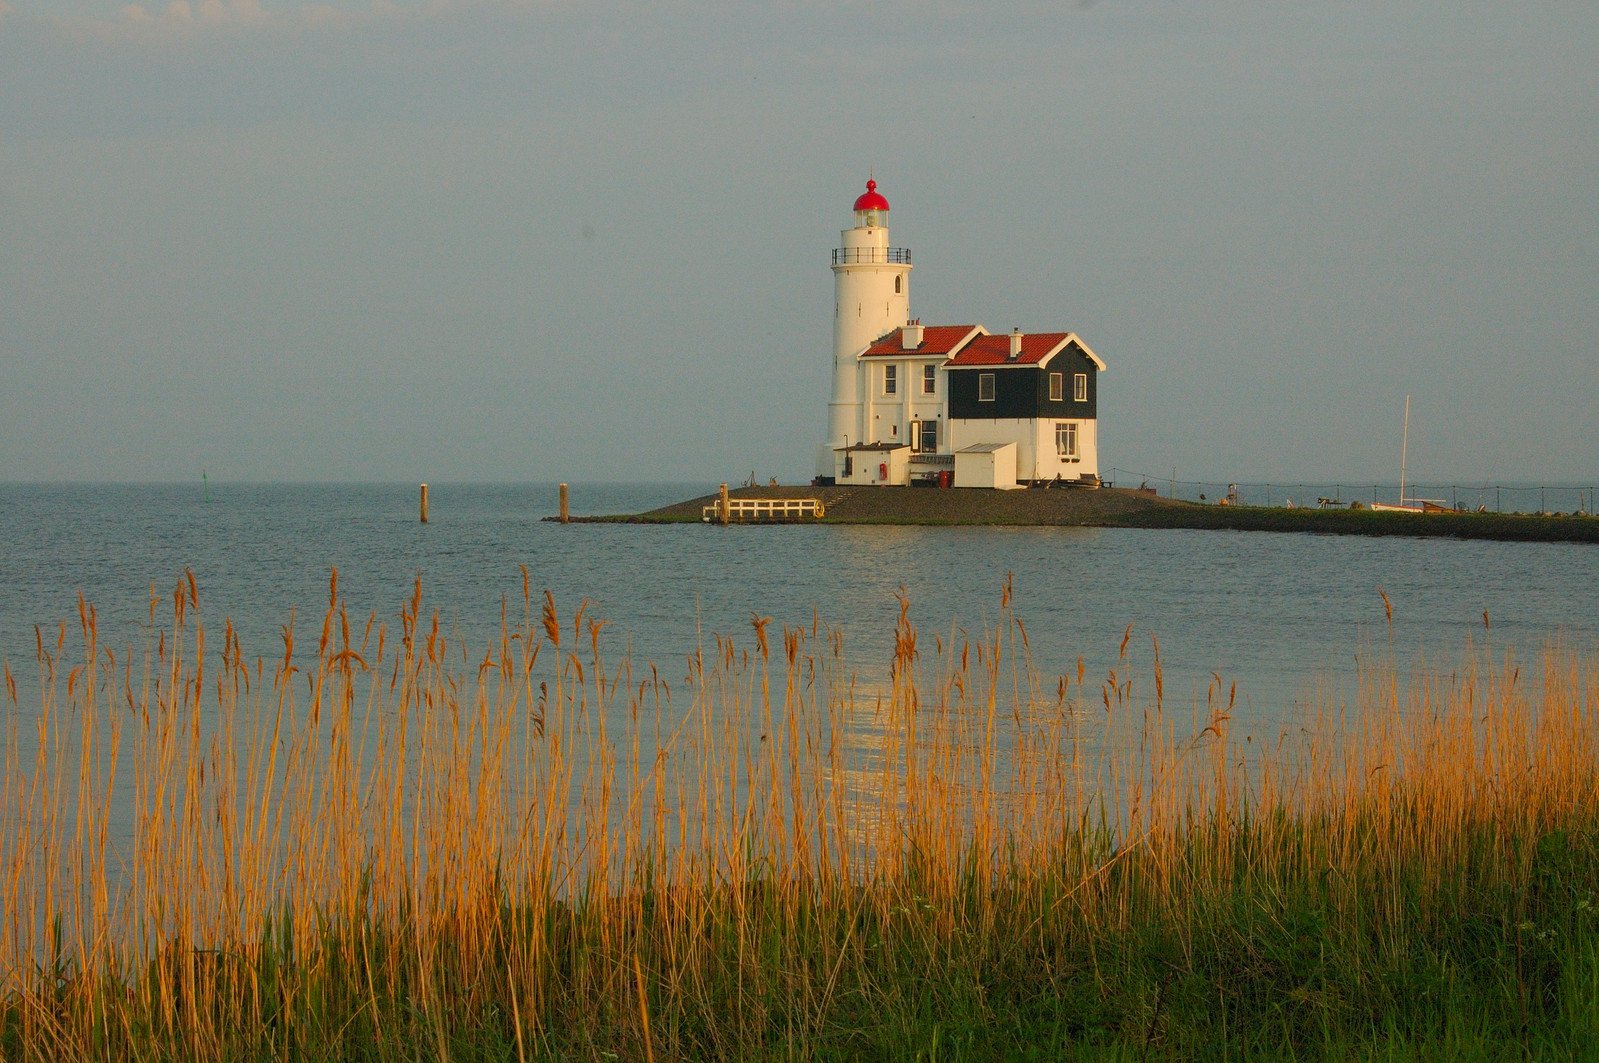 an image of the lighthouse that is out in the water